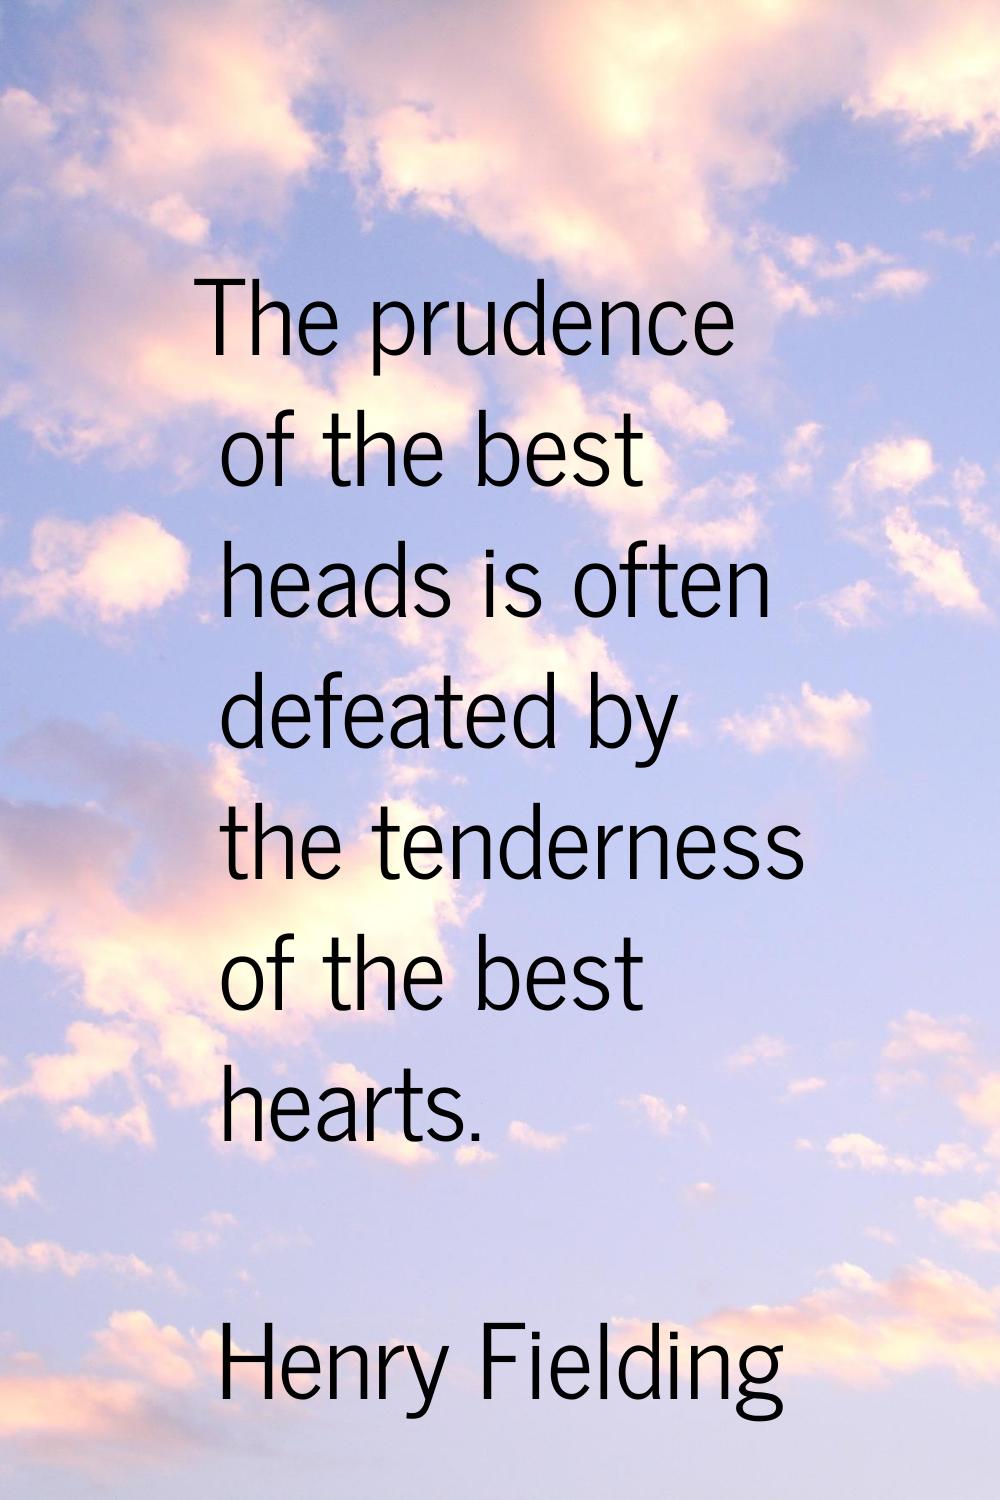 The prudence of the best heads is often defeated by the tenderness of the best hearts.